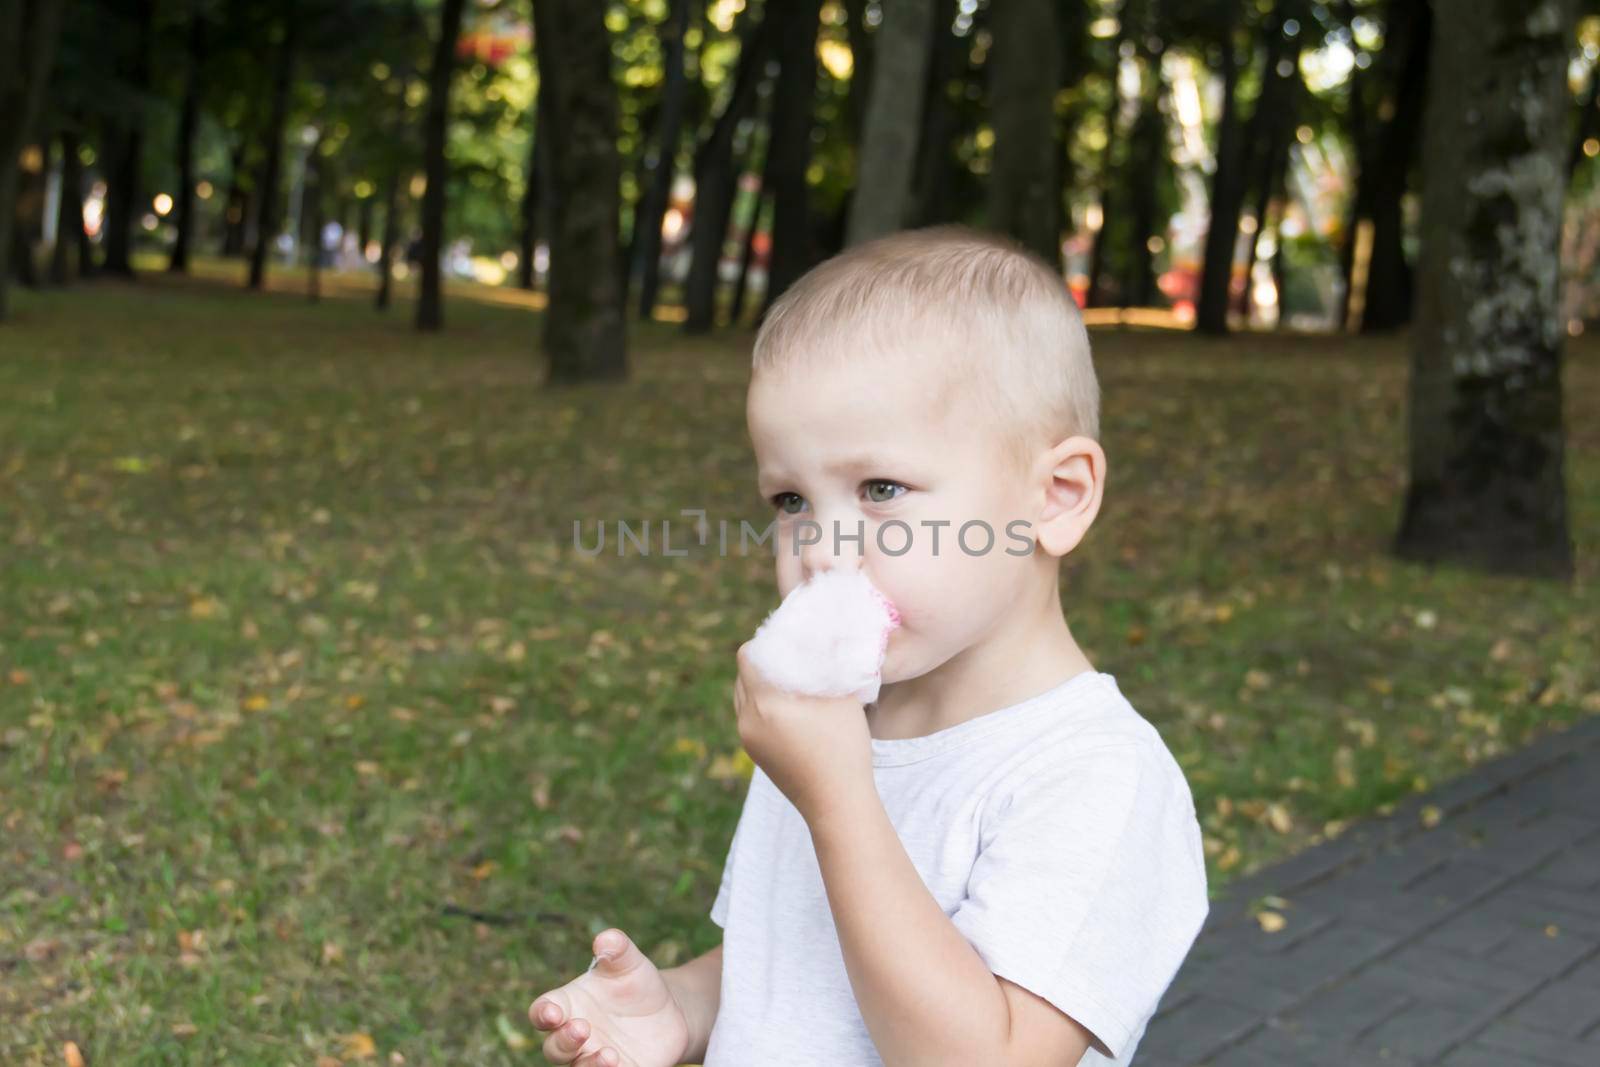 A small child eats pink cotton candy in an amusement park